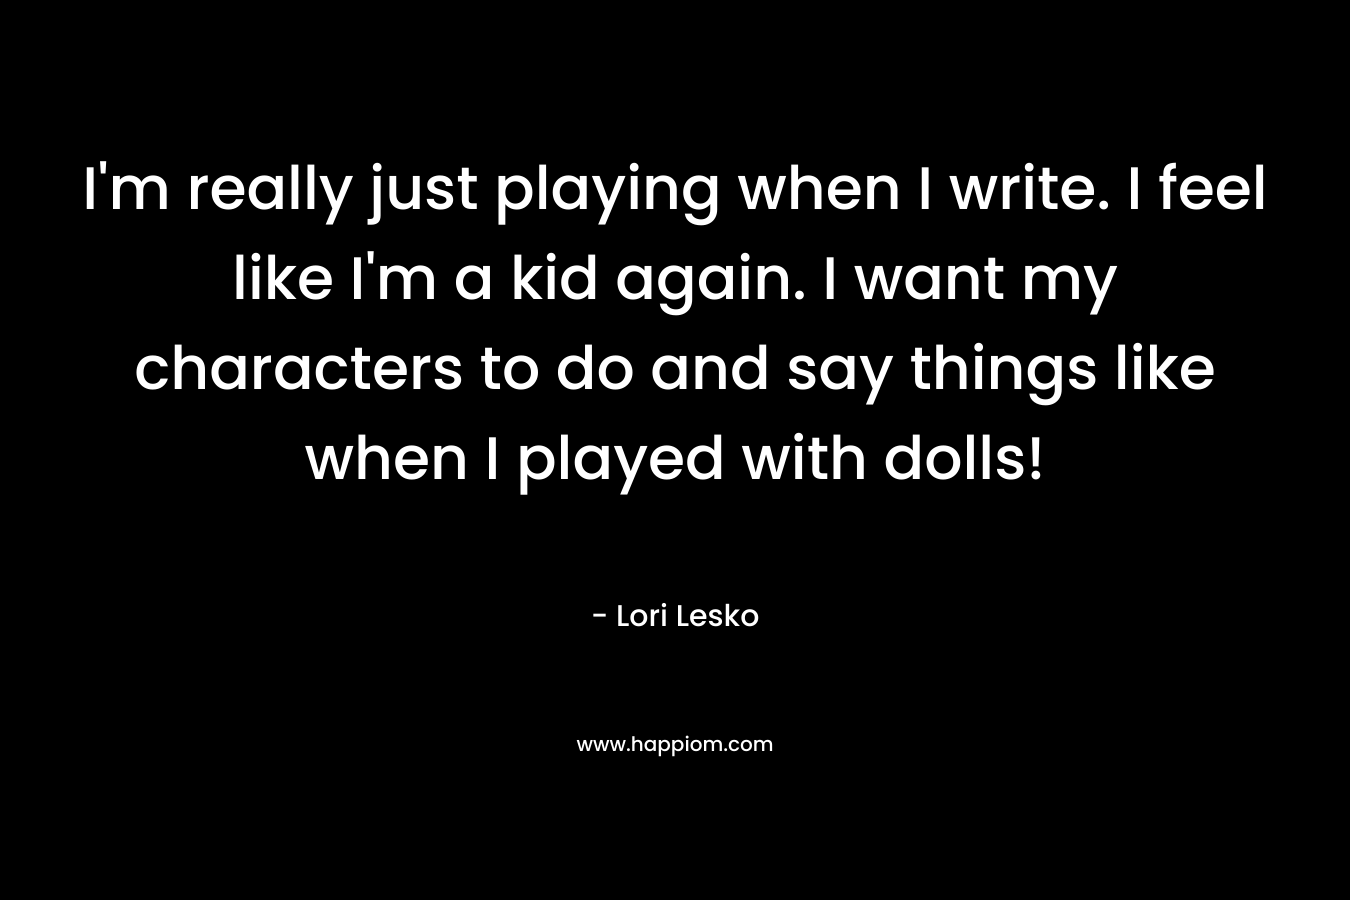 I'm really just playing when I write. I feel like I'm a kid again. I want my characters to do and say things like when I played with dolls!